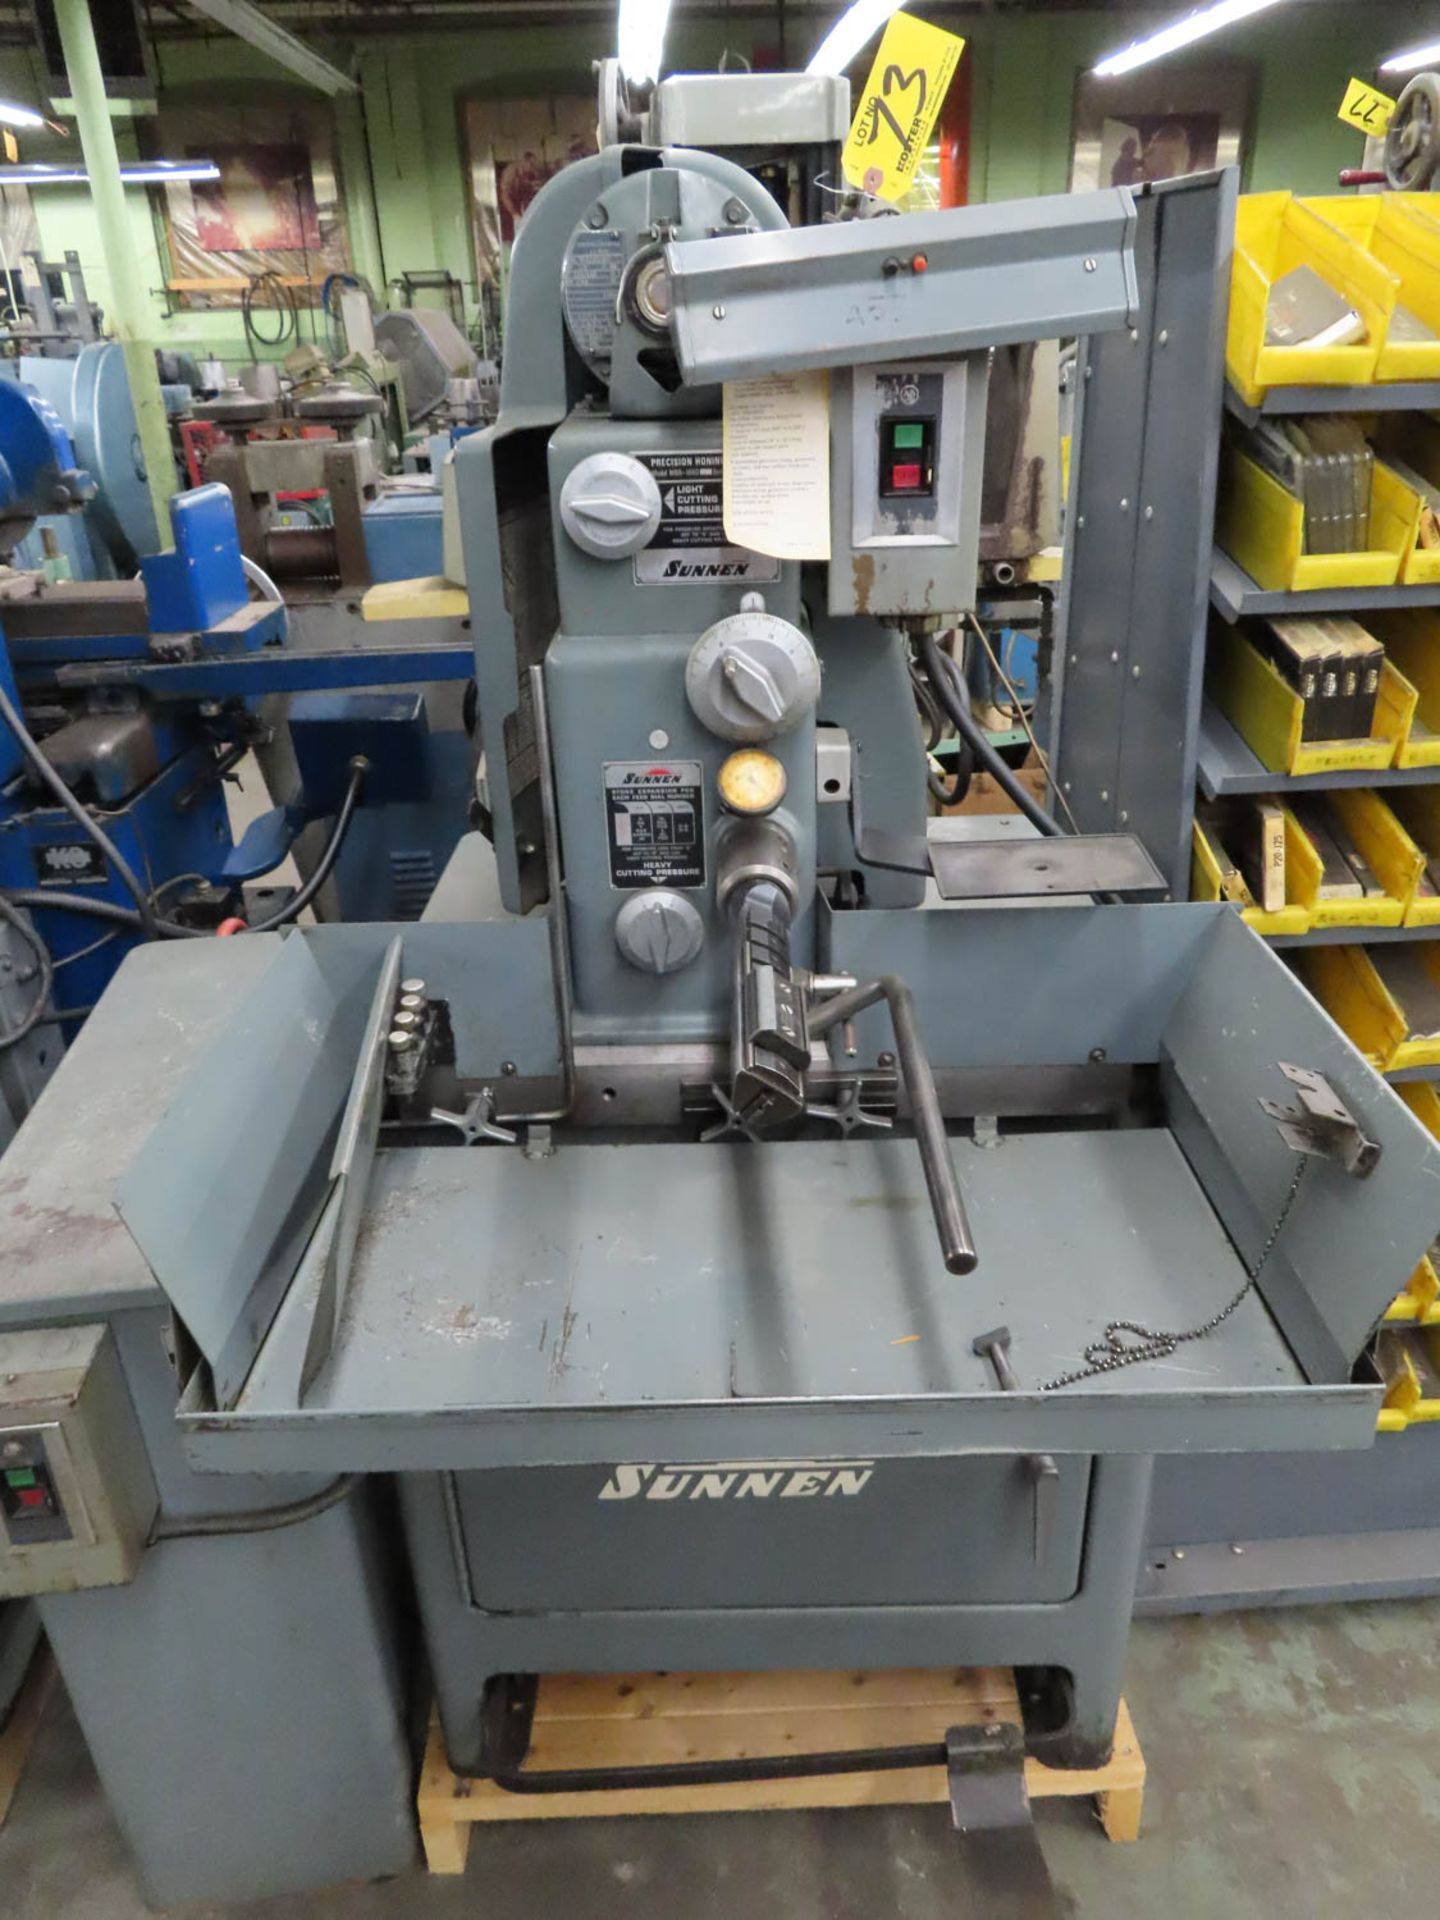 SUNNEN MDL. MBB-1650 PRECISION HONING MACHINE, WITH PF 150 FILTER, 3 PHASE, 220/440 VOLT, I.D.